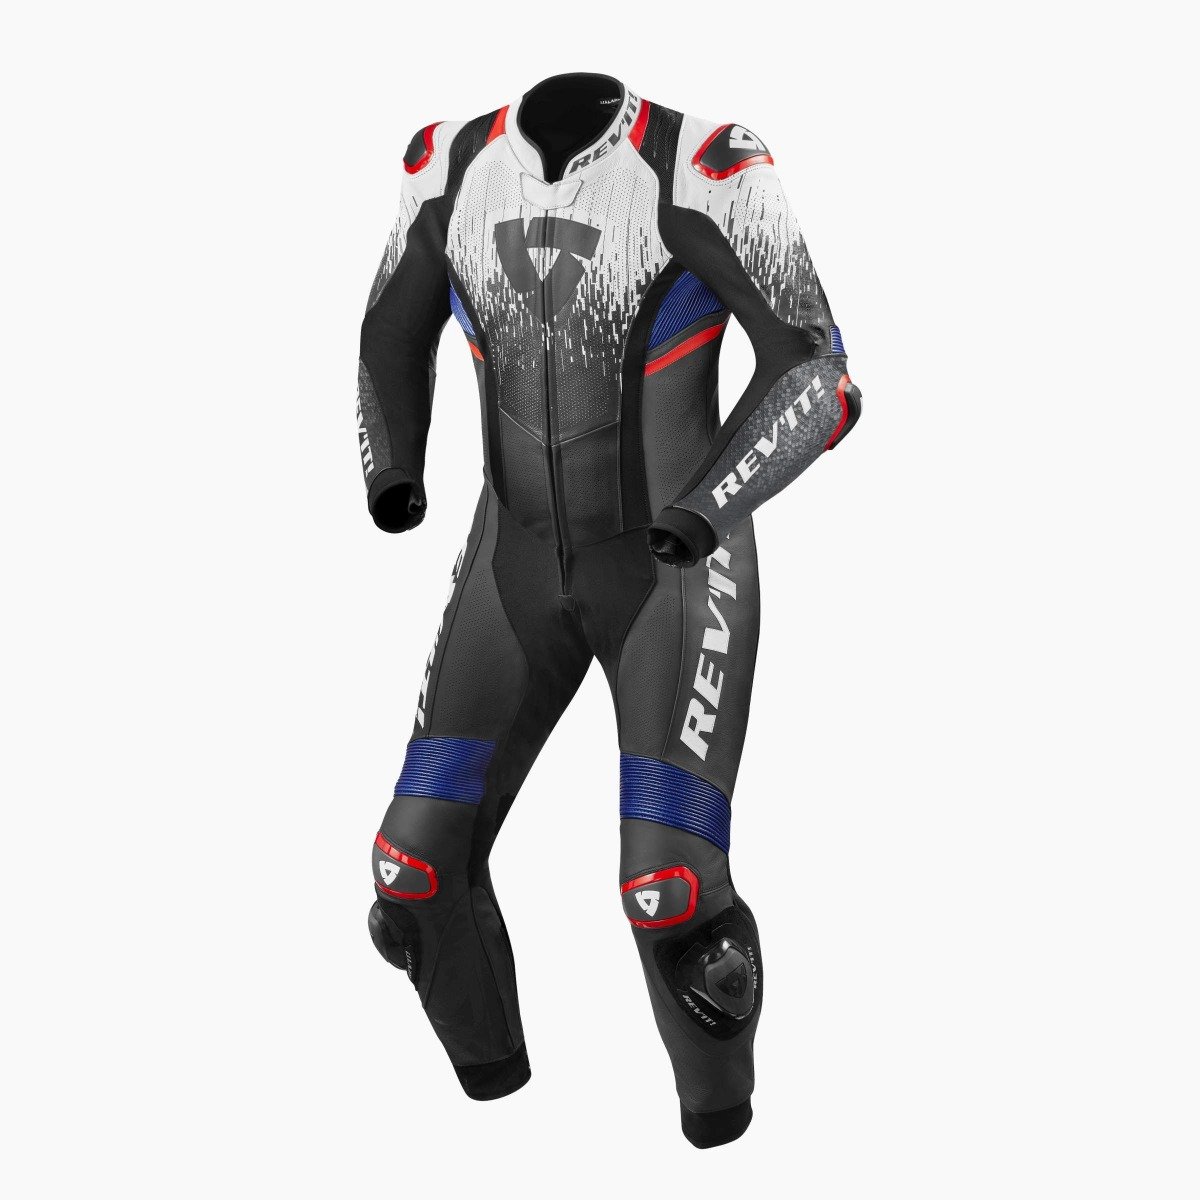 Image of REV'IT! Quantum 2 One Piece Racing Suit White Blue Size 48 ID 8700001313469